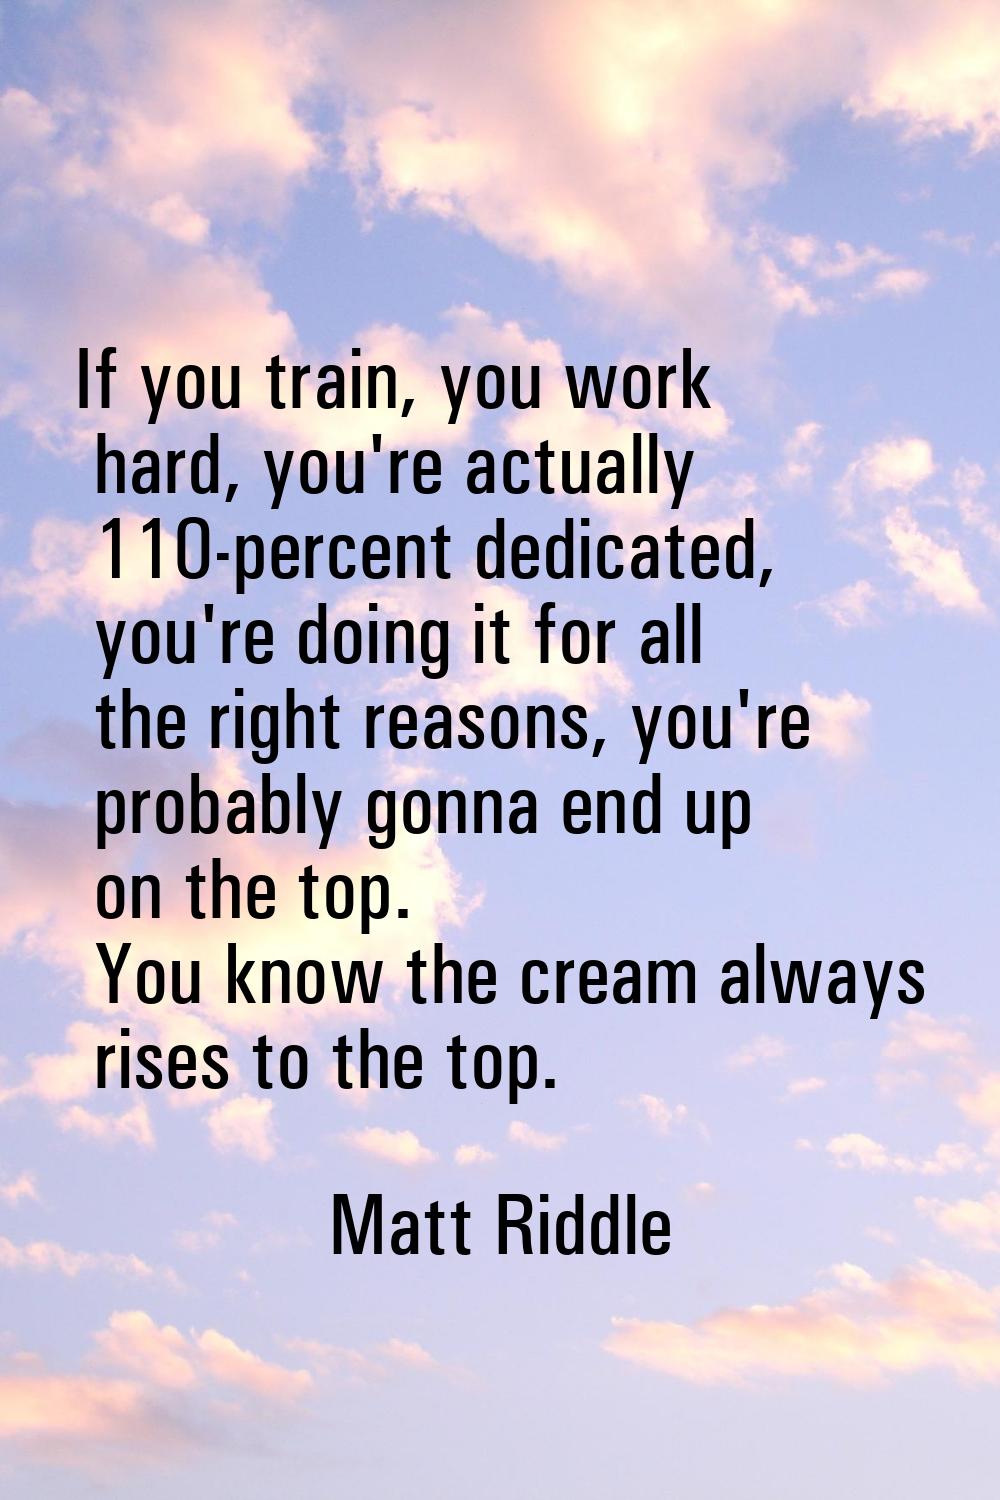 If you train, you work hard, you're actually 110-percent dedicated, you're doing it for all the rig